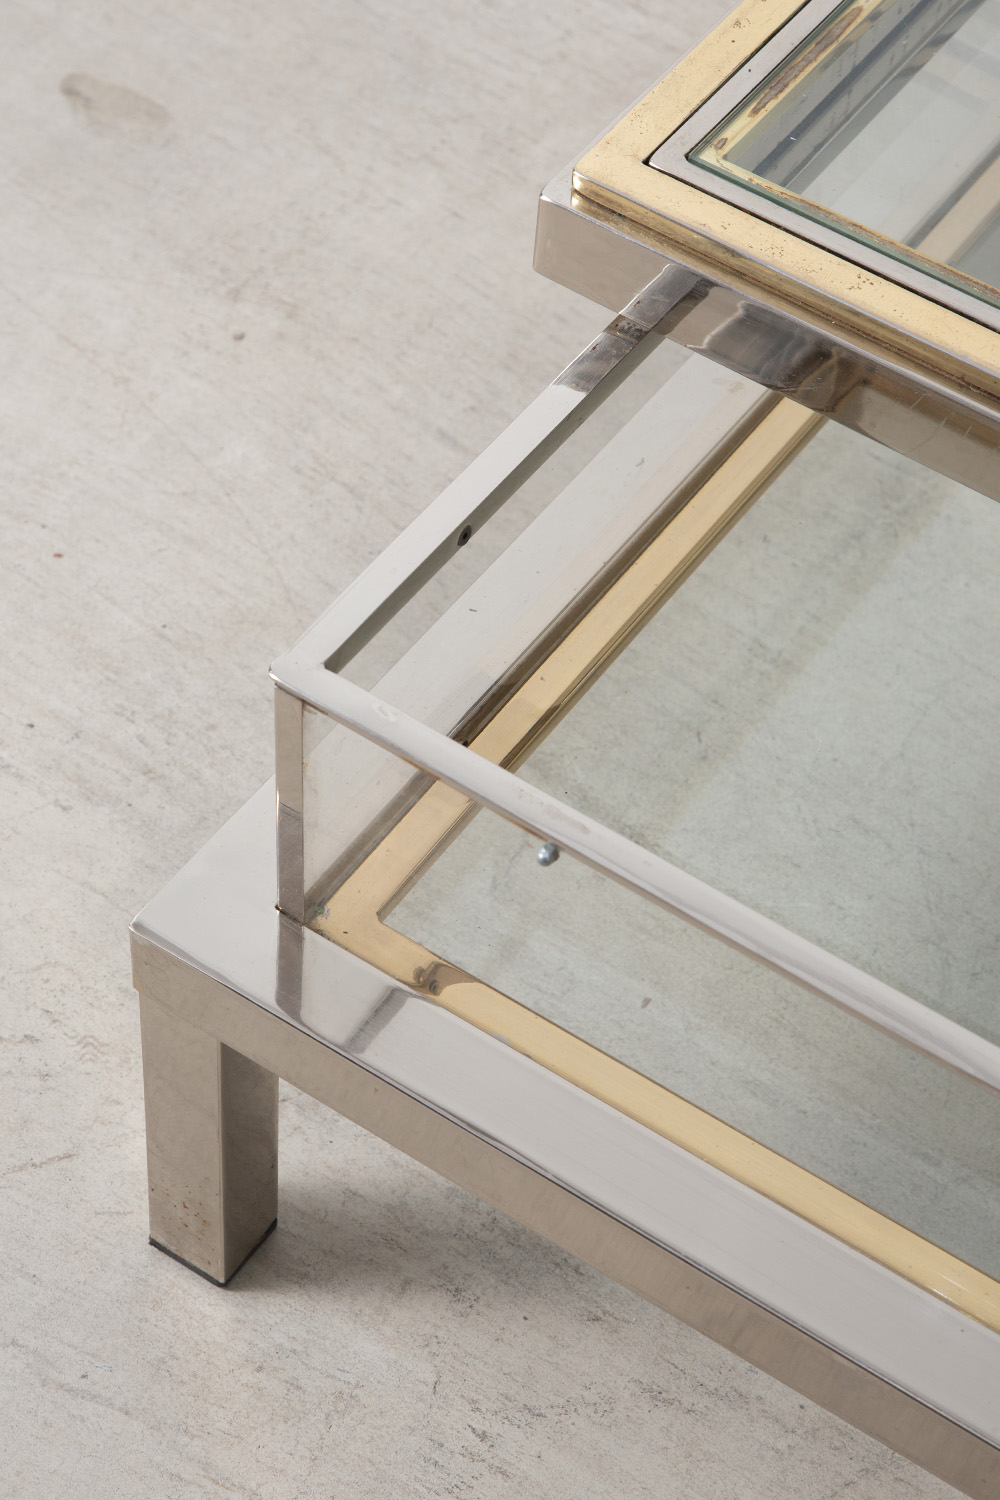 Sliding Top Coffee Table for Maison Jansen in Brass , Chrome and Glass